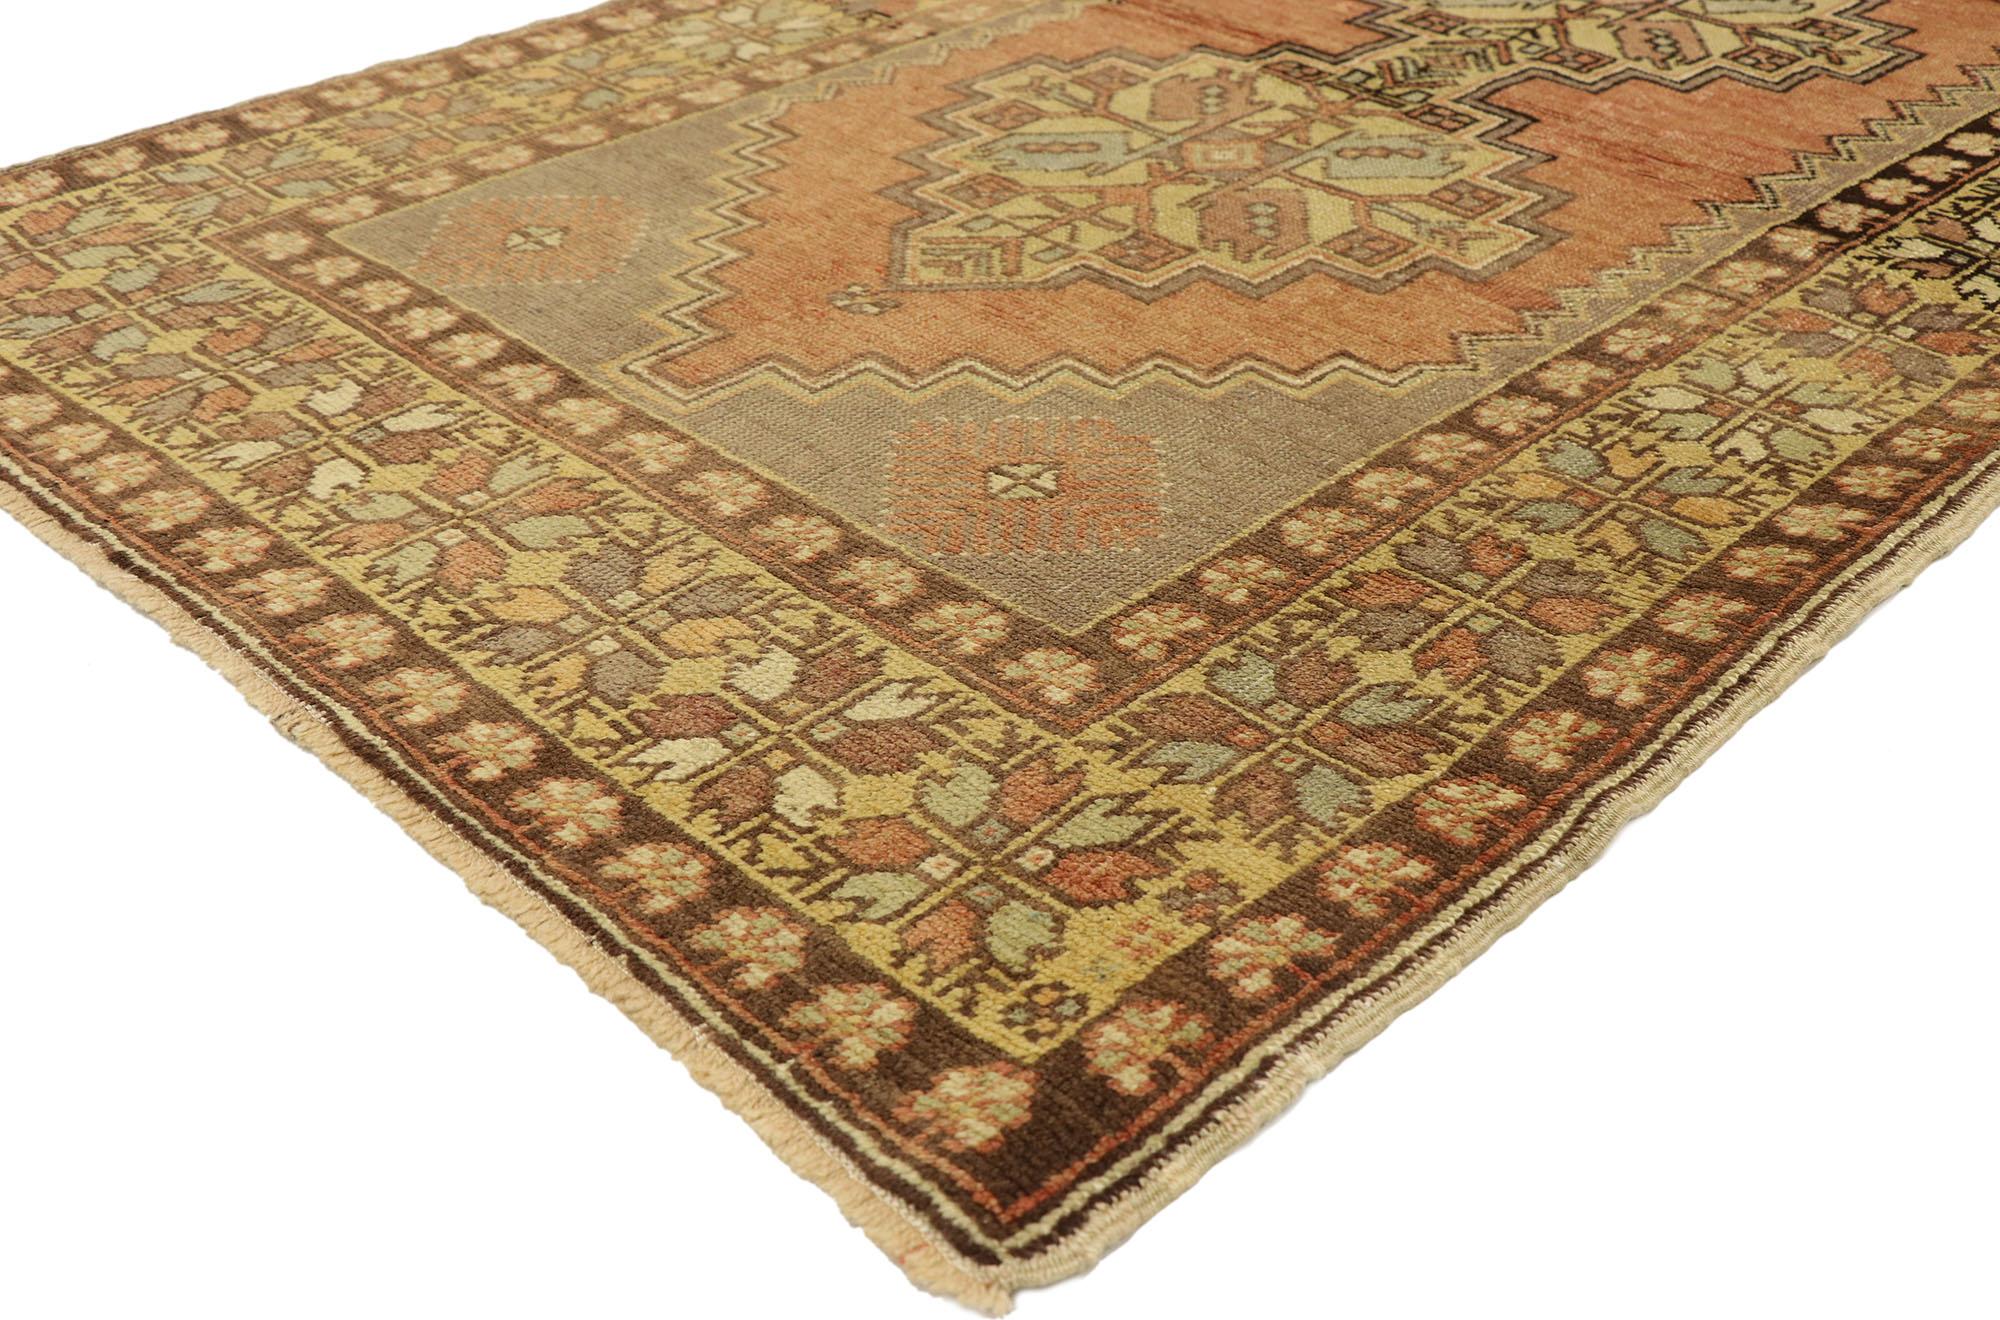 50172 vintage Turkish Oushak Accent rug with Rustic Spanish Revival style. Warm and inviting combined with rustic sensibility, this hand knotted wool vintage Turkish Oushak rug astounds with its rugged beauty. The abrashed rust and taupe cut-out